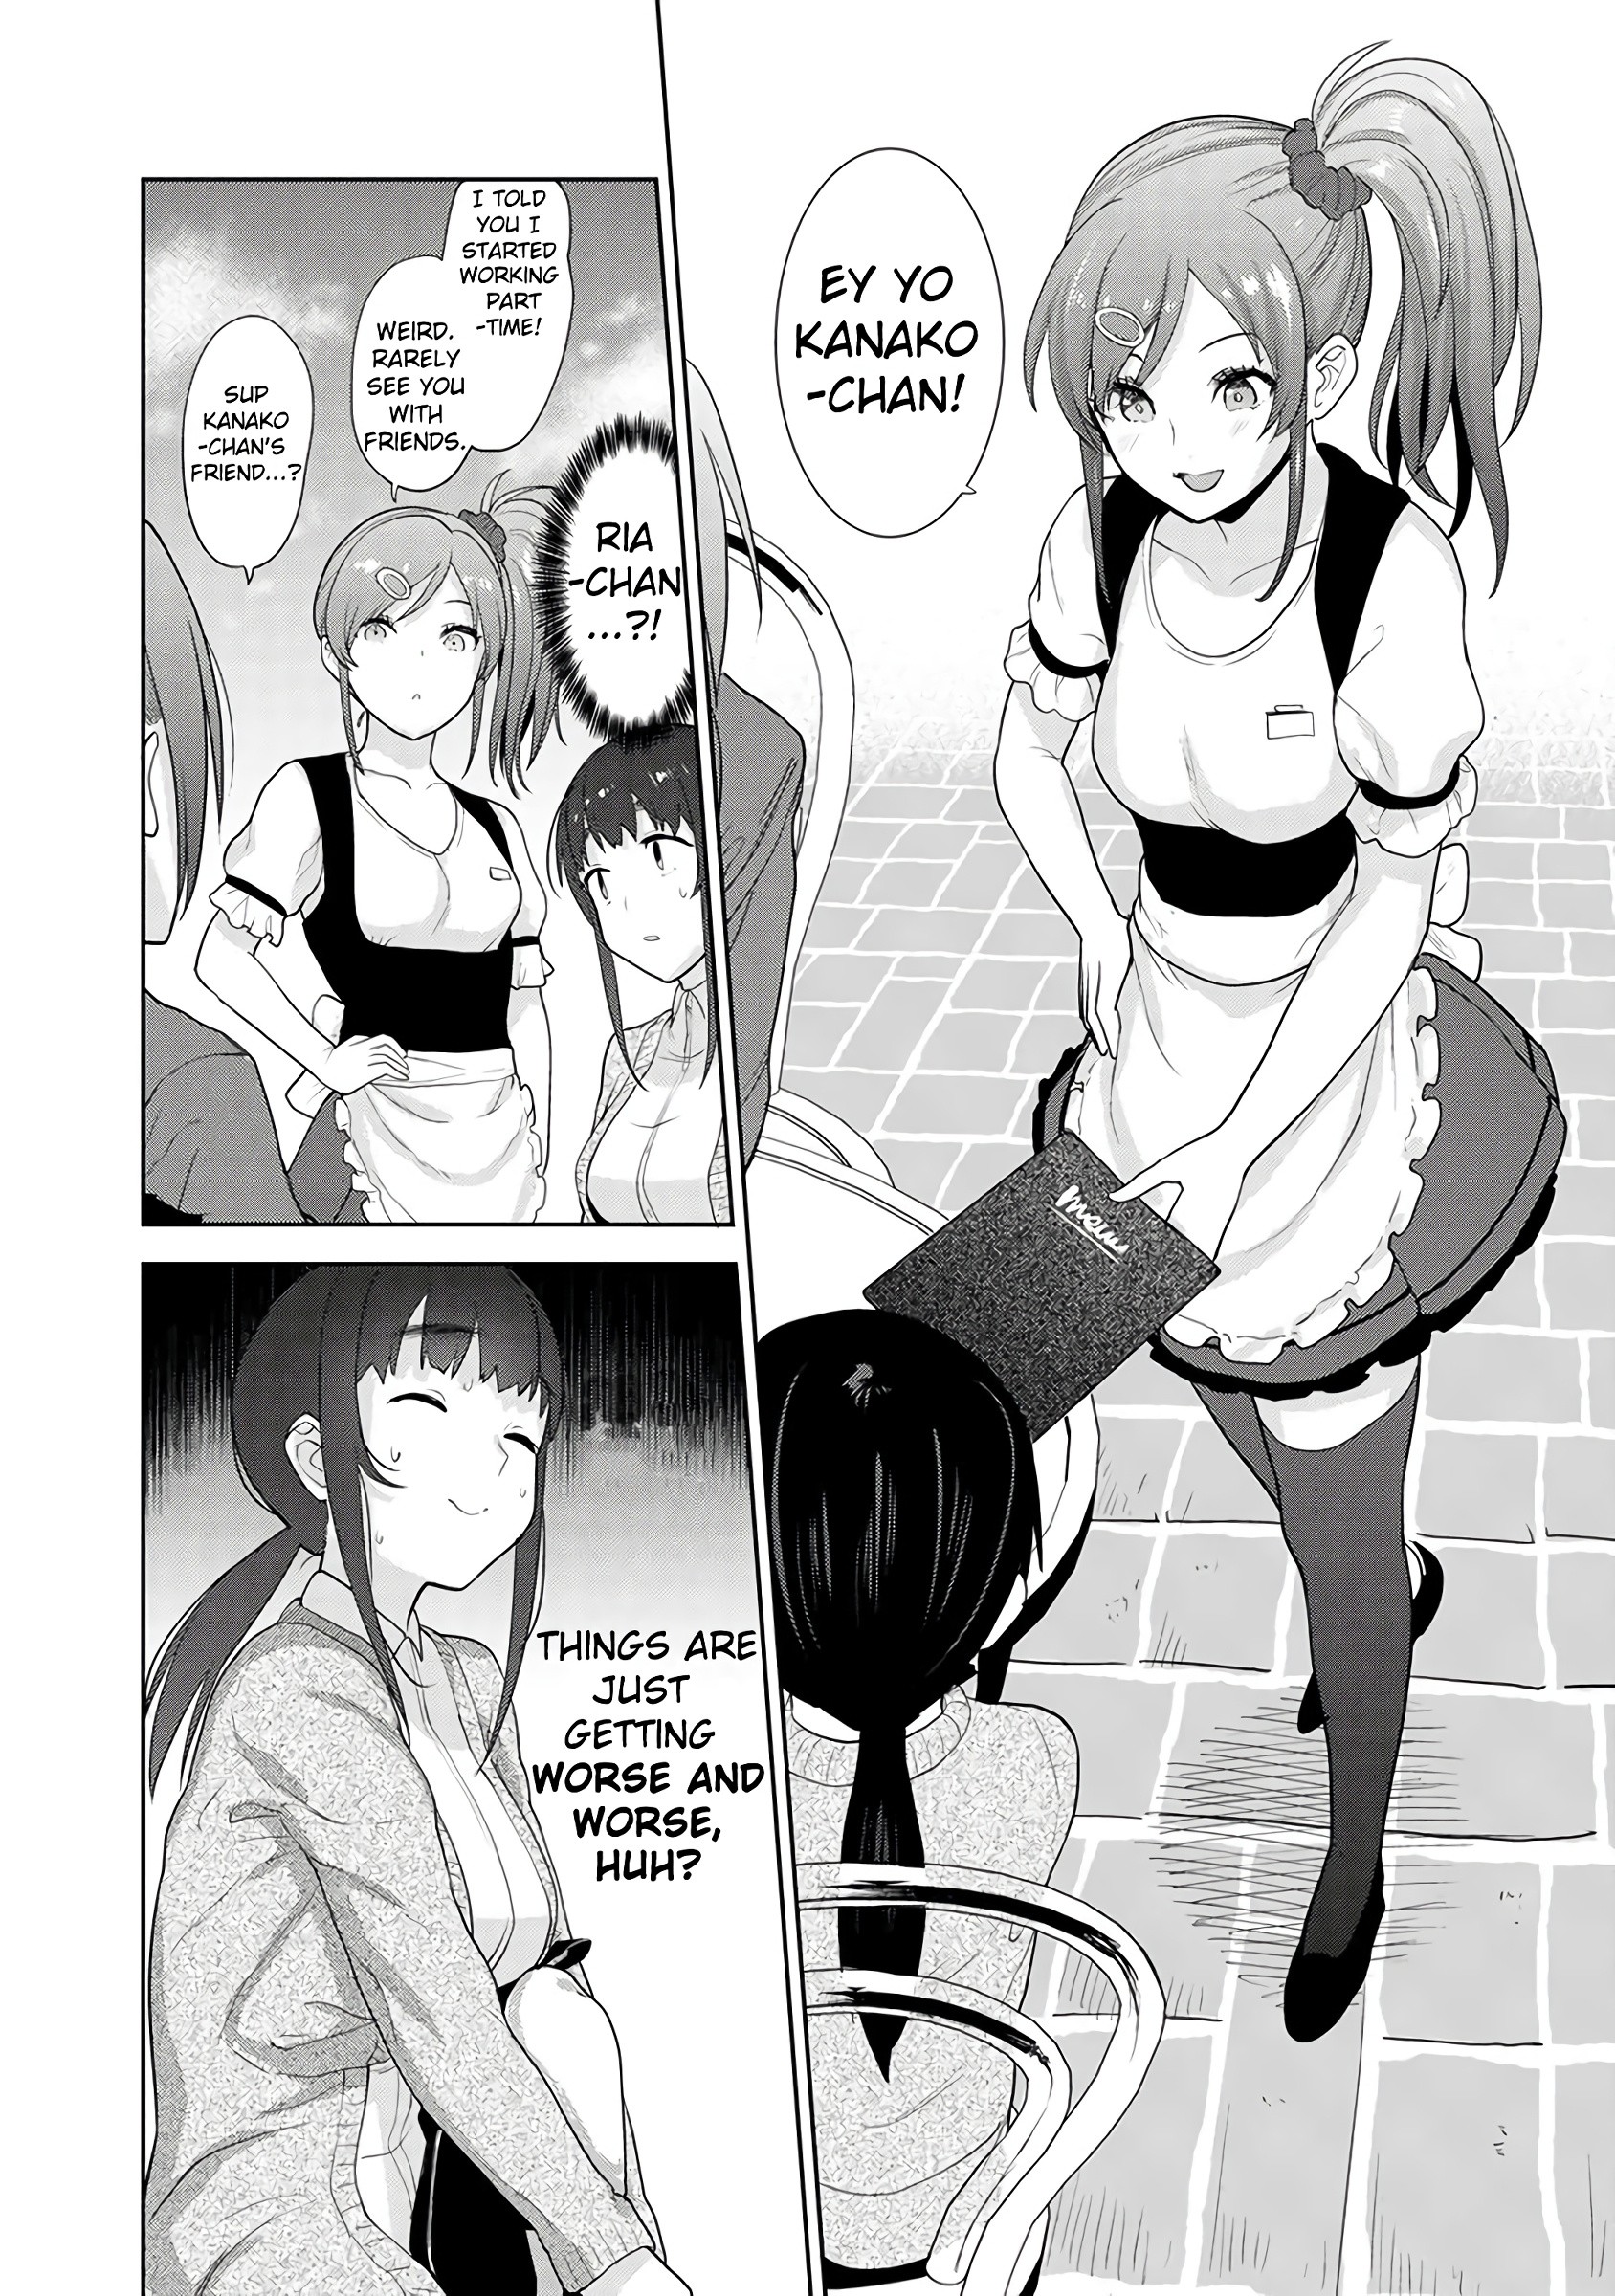 Method to Catch a Pretty Girl 9 hentai manga picture 12